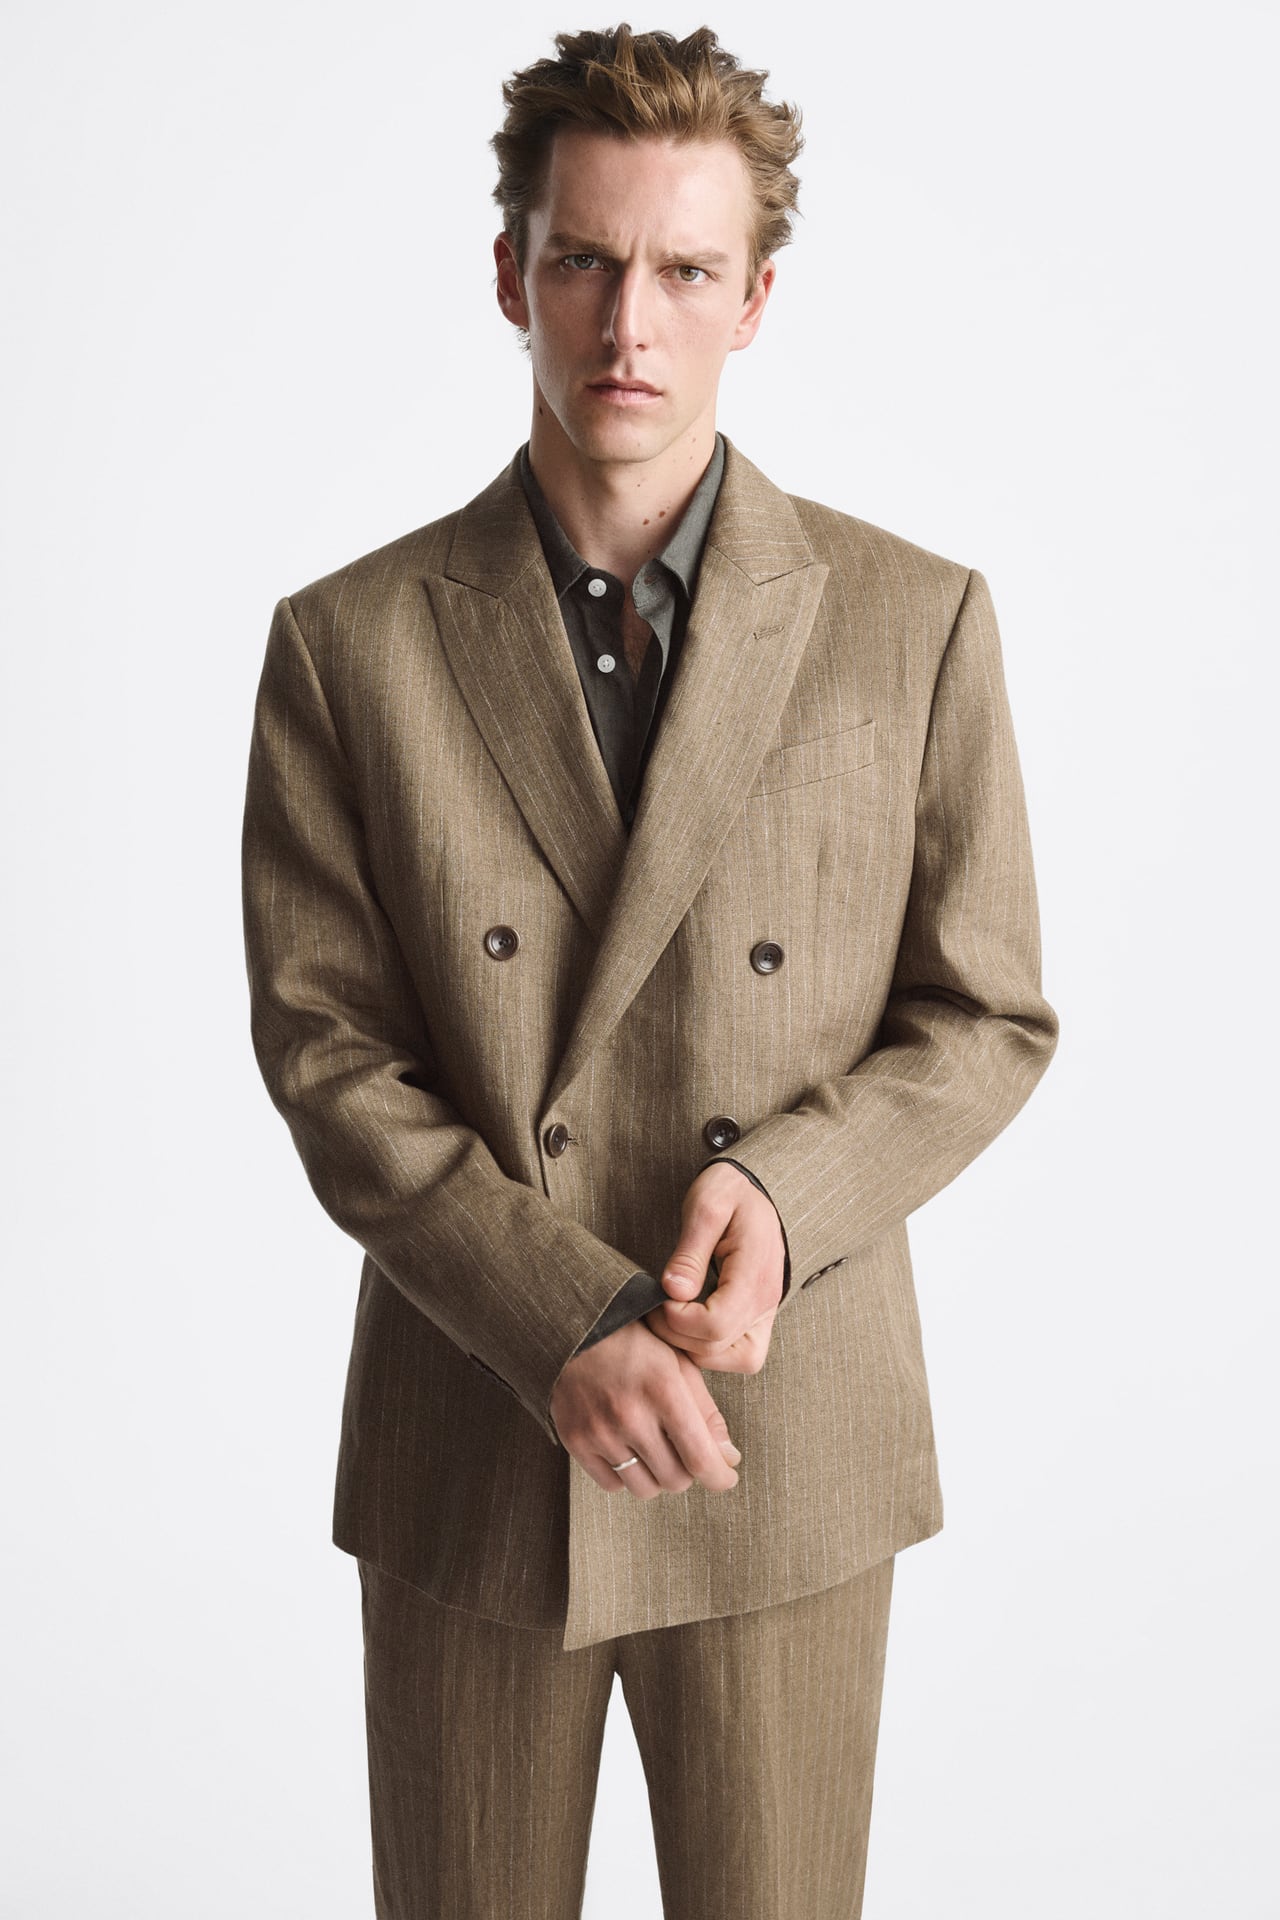 Image of a man wearing a light brown suit